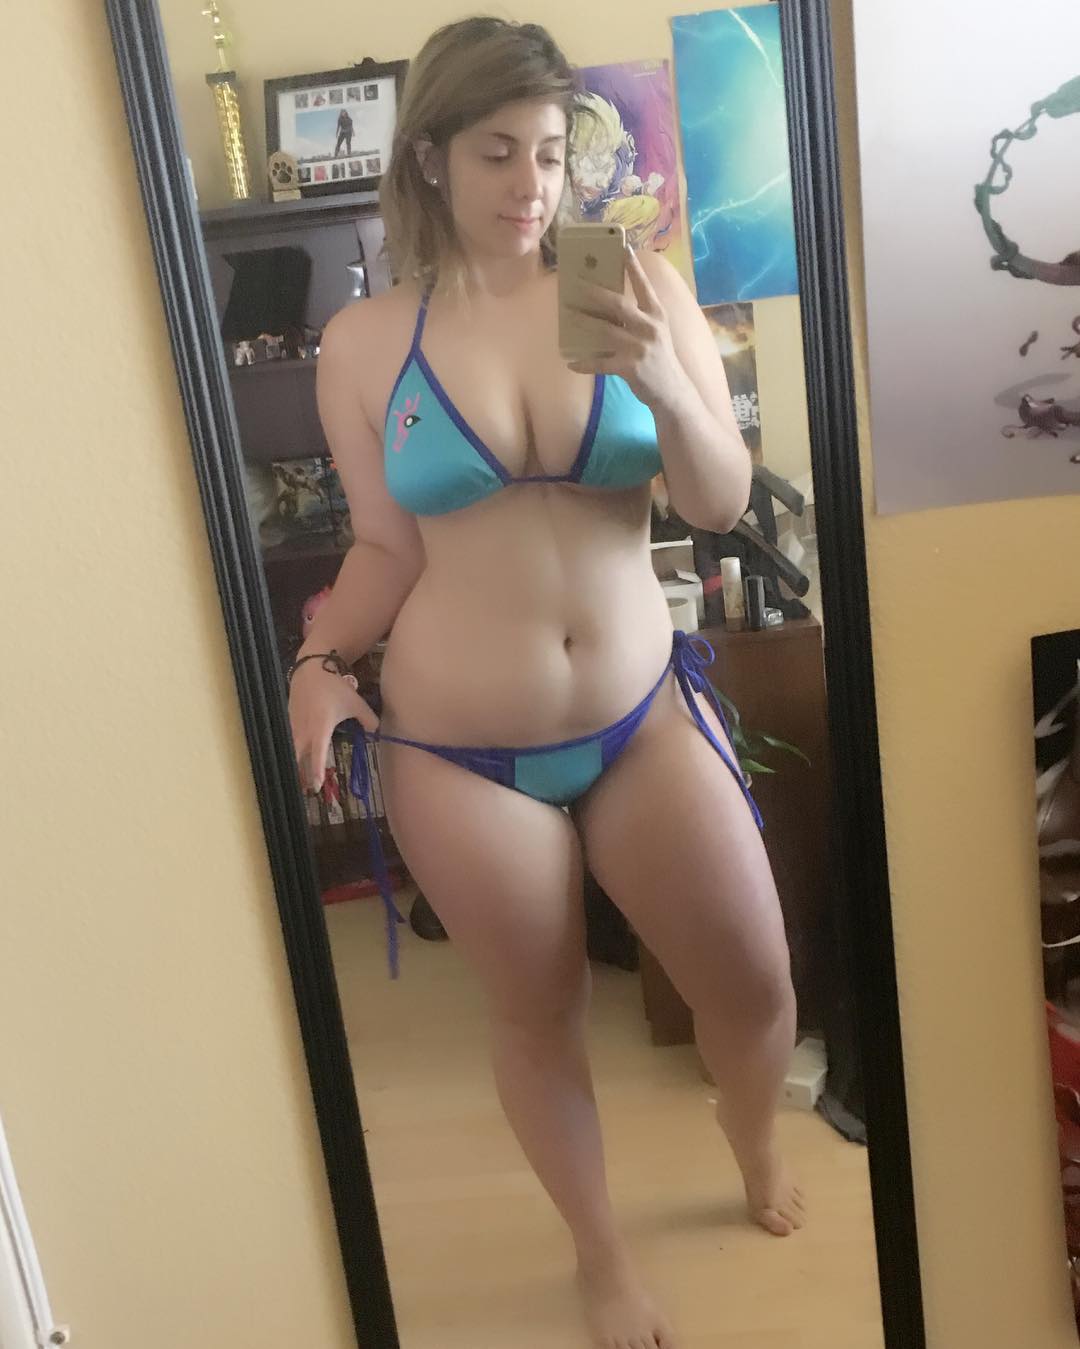 Jessica R. reccomend from thicker girl